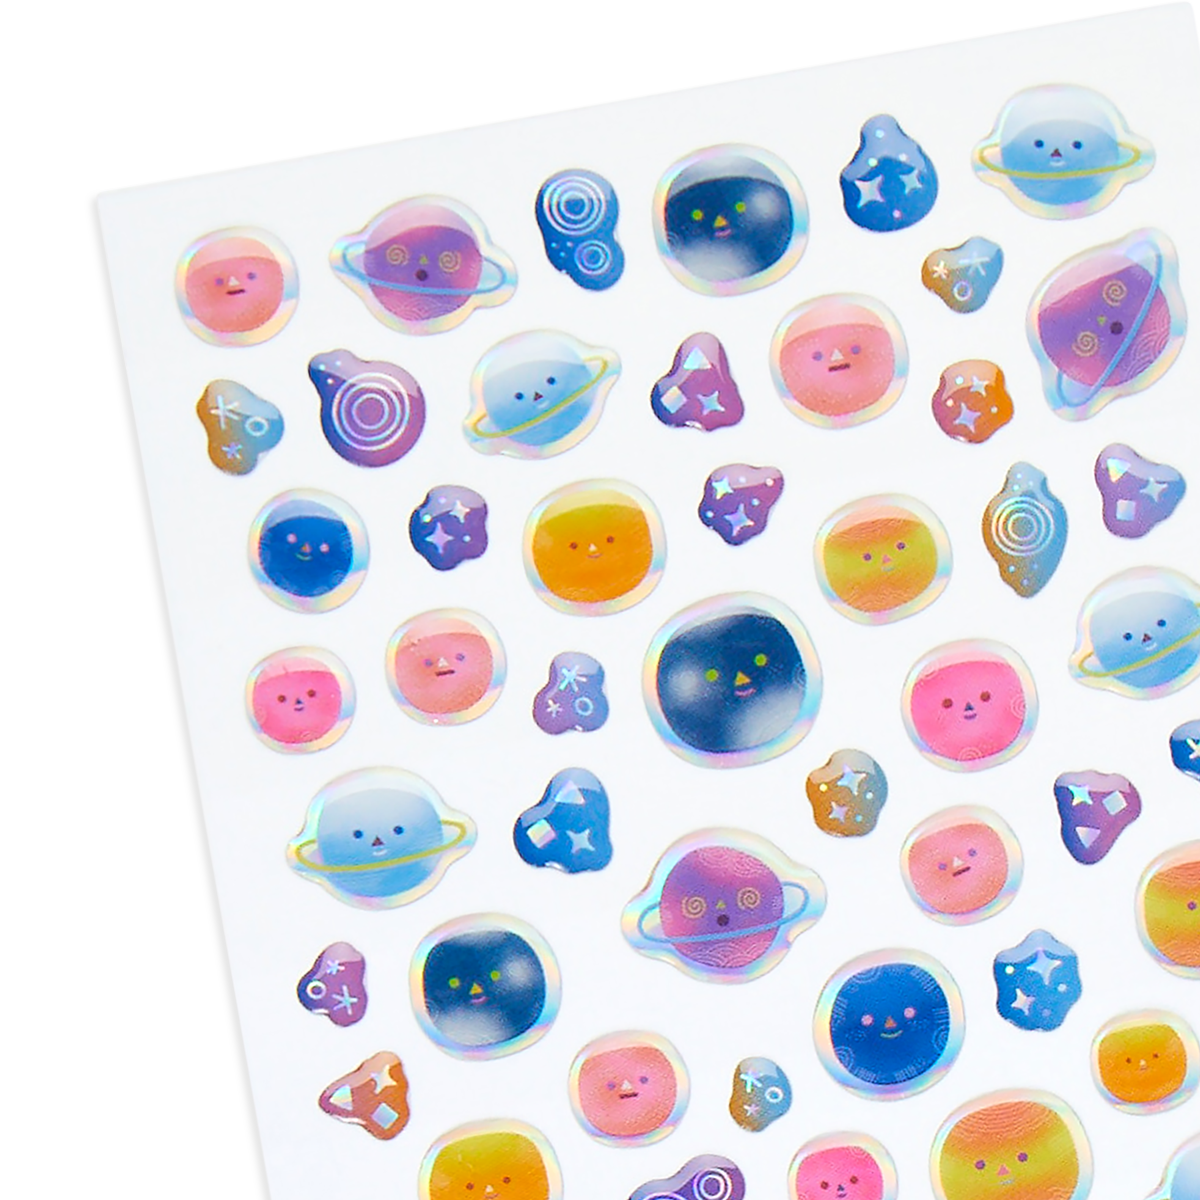  OLYCRAFT 8 Sheets 3D Star Moon Stickers Cute Space